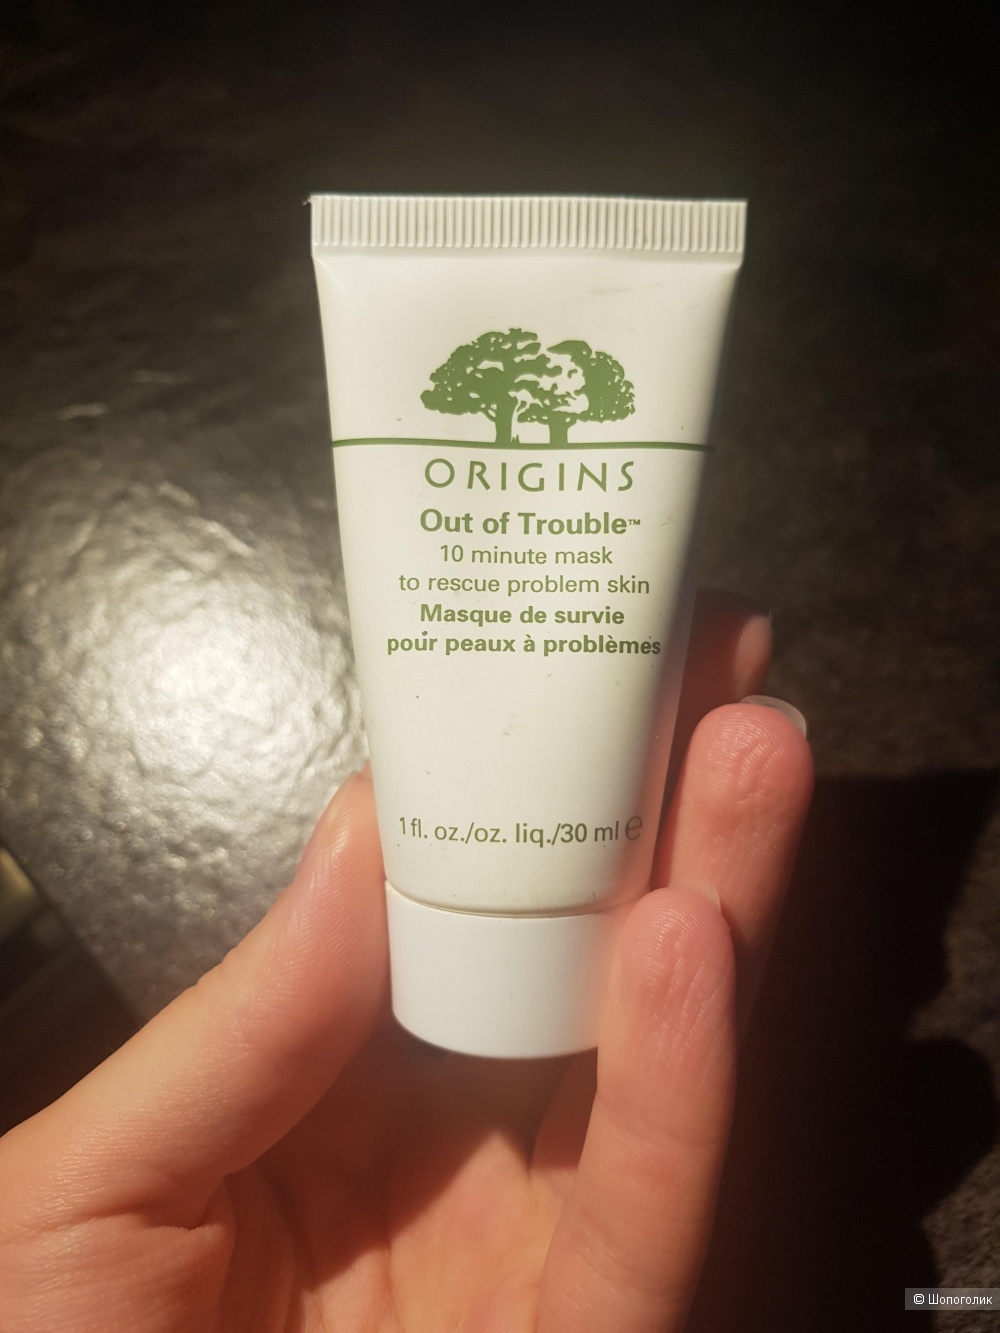 The origins out of trouble 10 minute mask